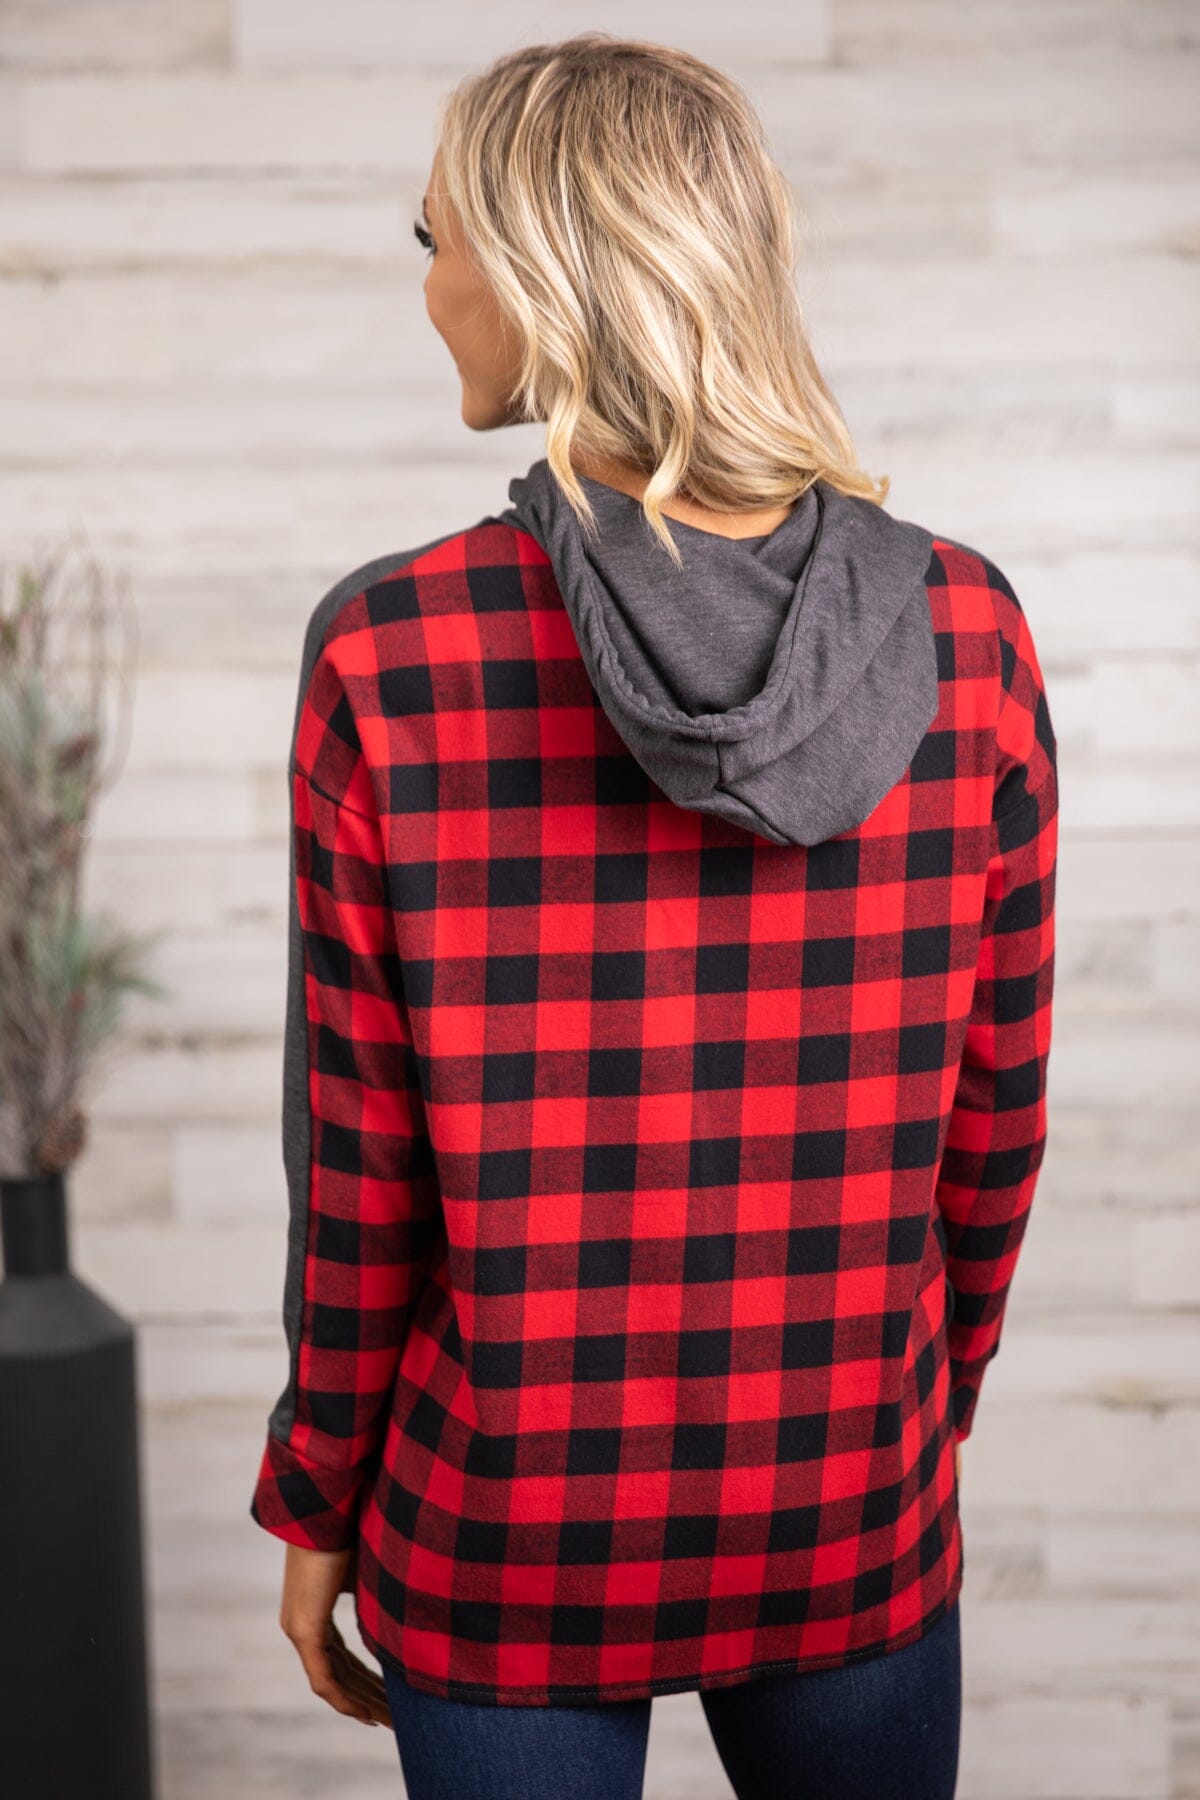 Charcoal and Red Buffalo Plaid Hooded Top - Filly Flair